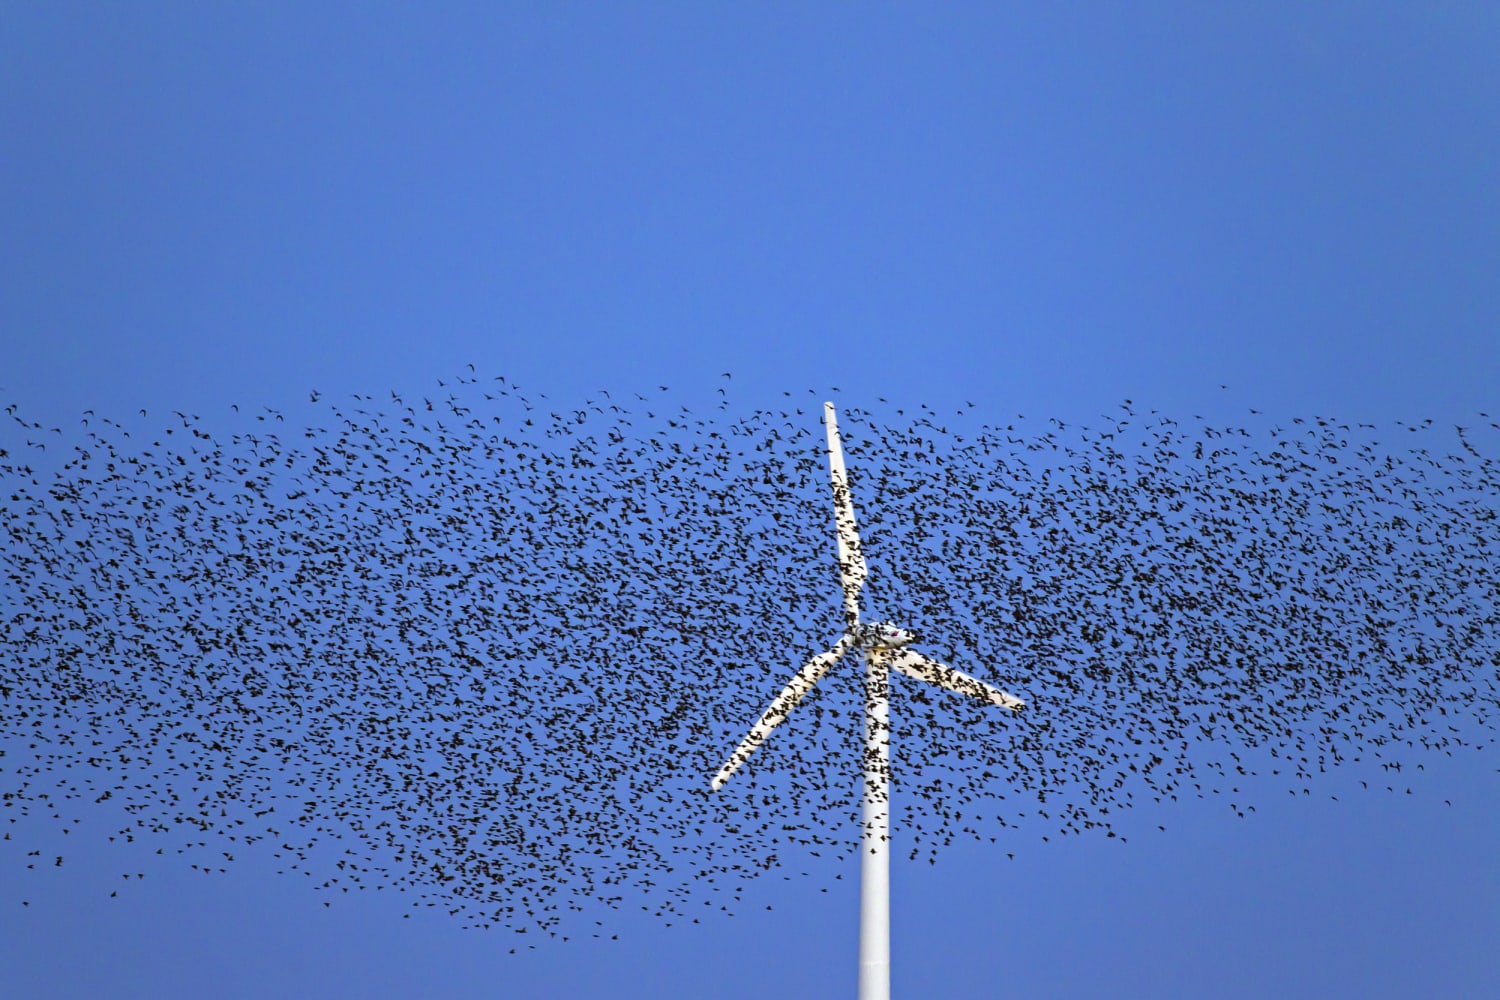 Wind energy takes a toll on birds, but now there's help